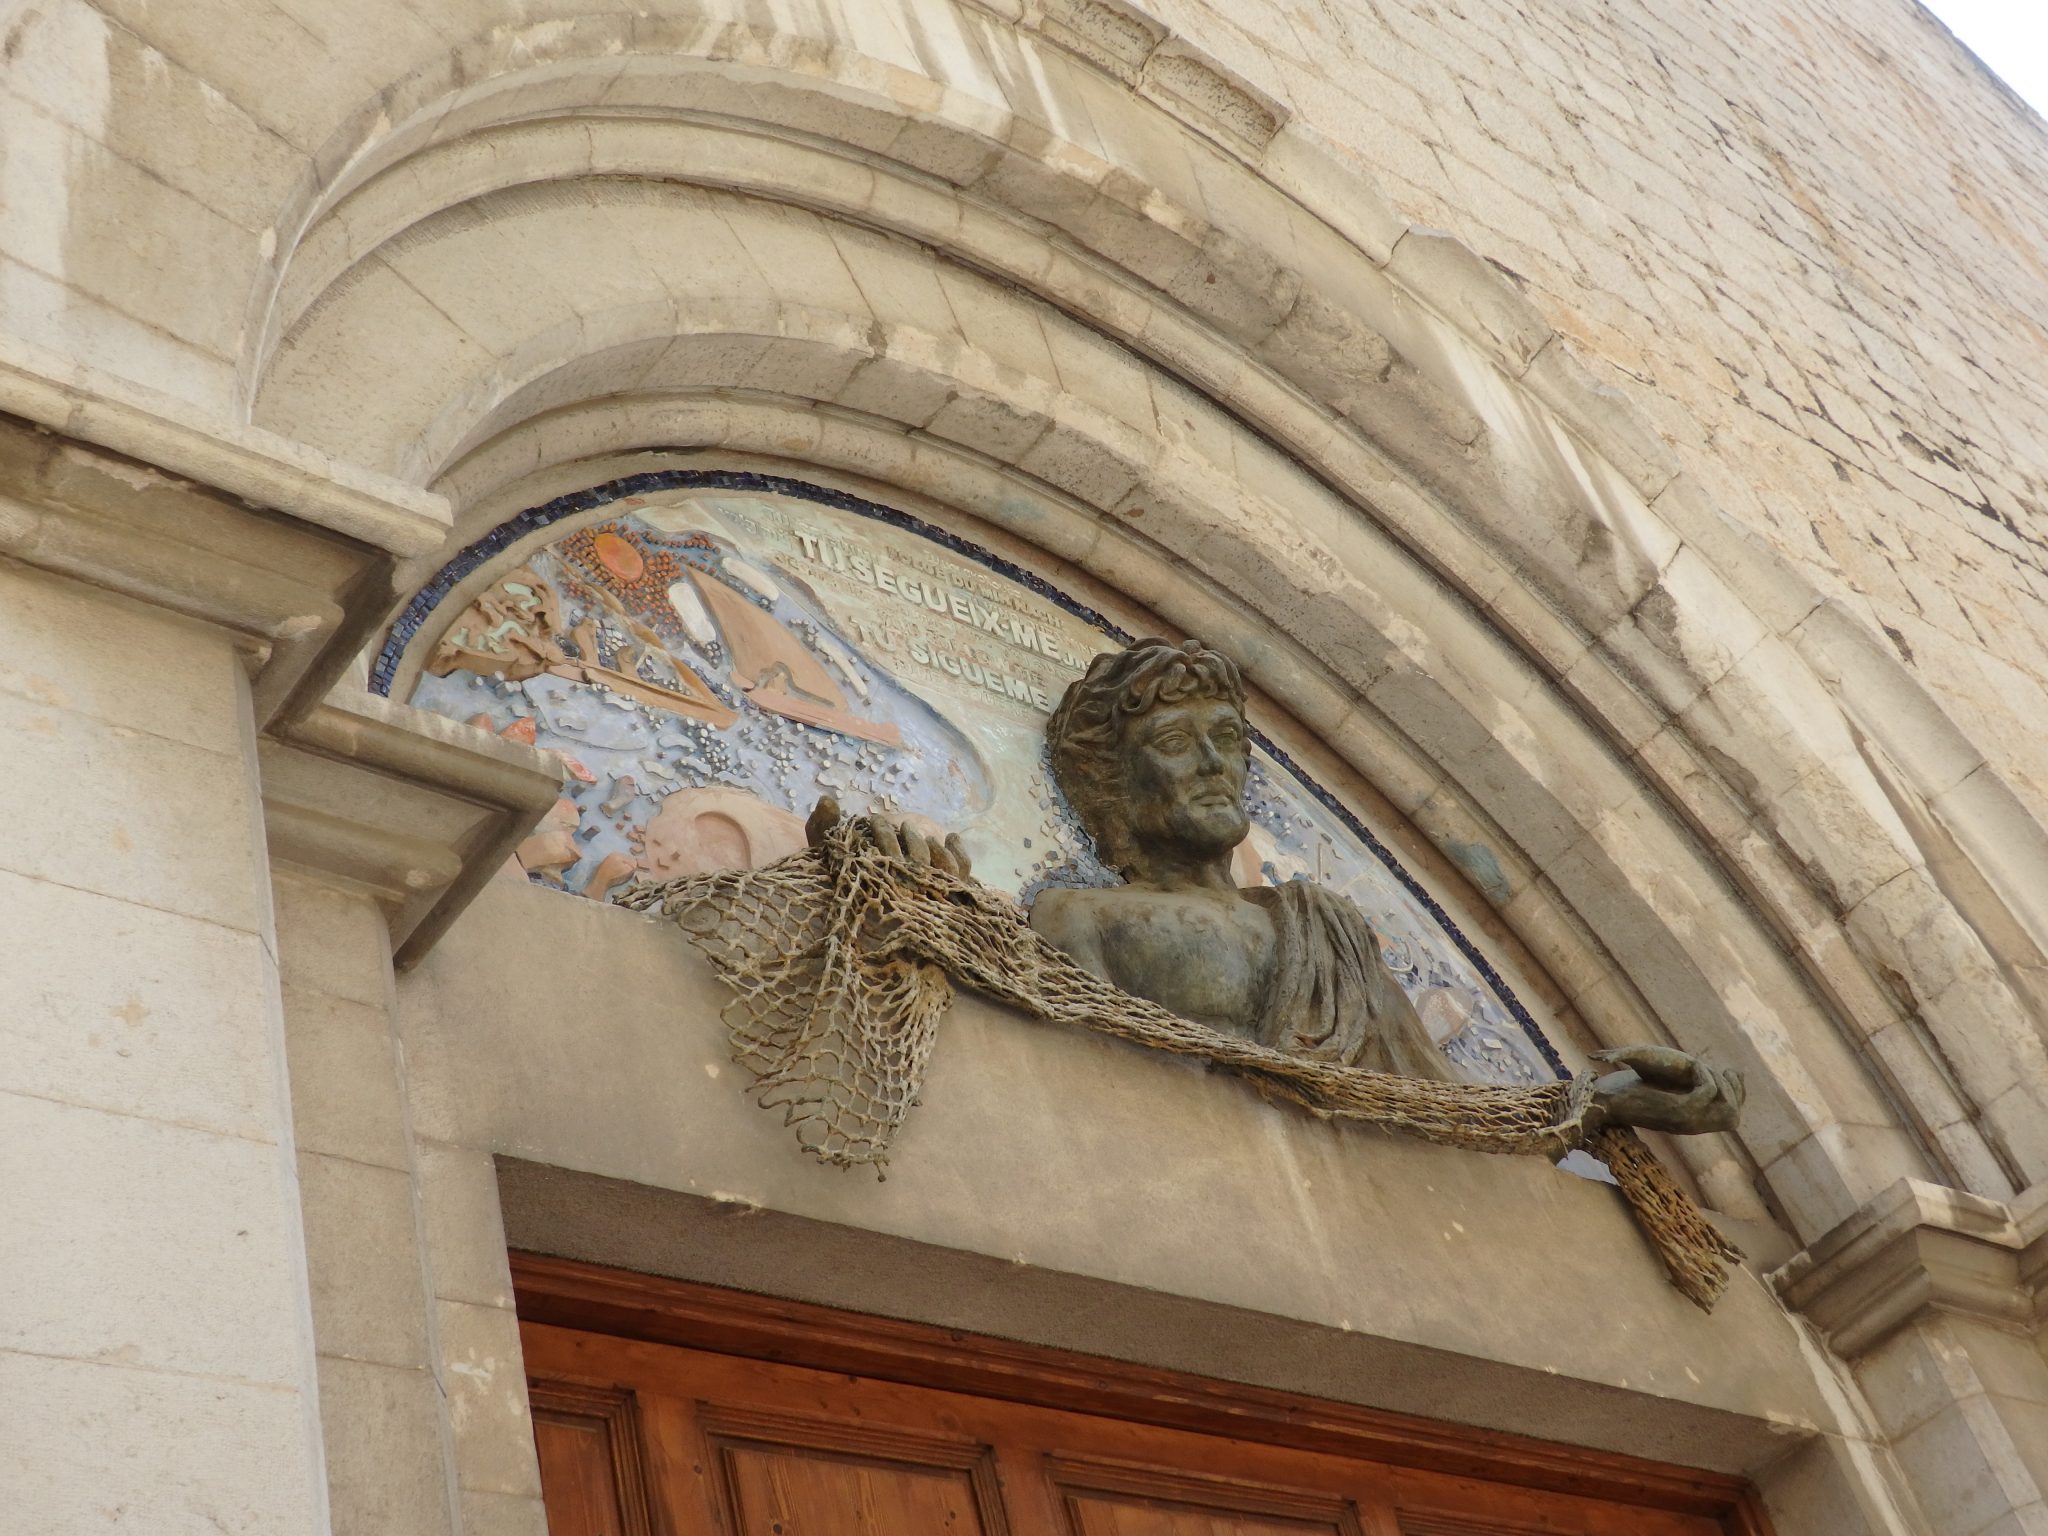 above the entrance to the church of Sant Pere in Figueres, Spain